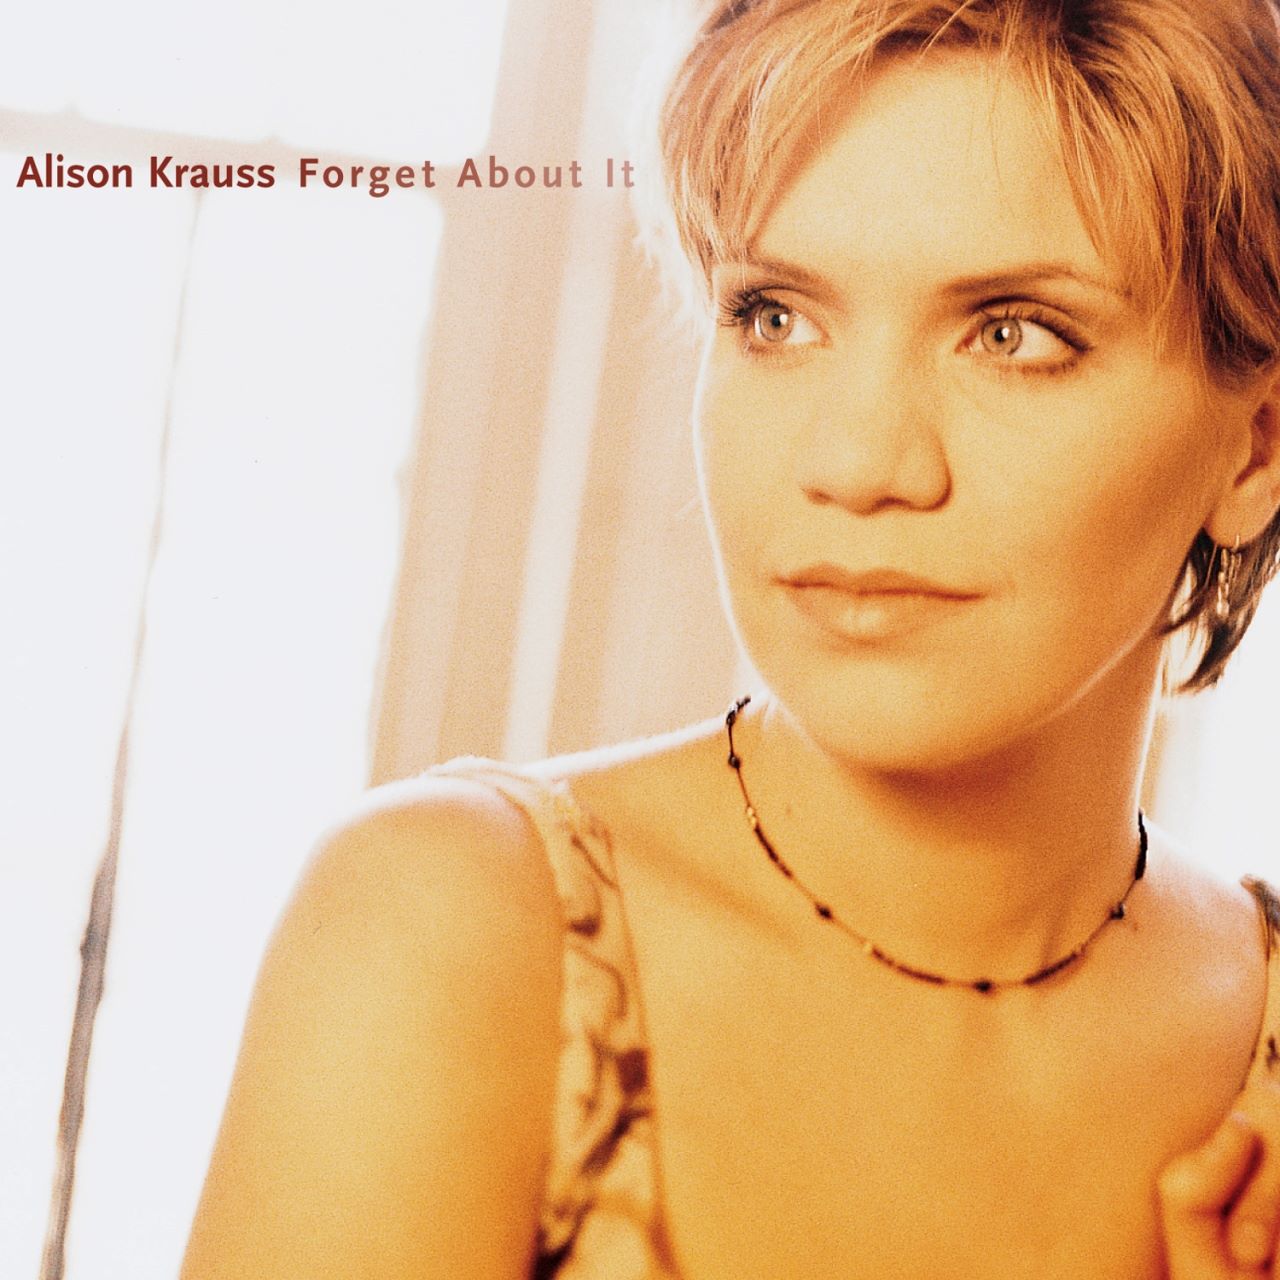 Alison Krauss - Forget About It cover album